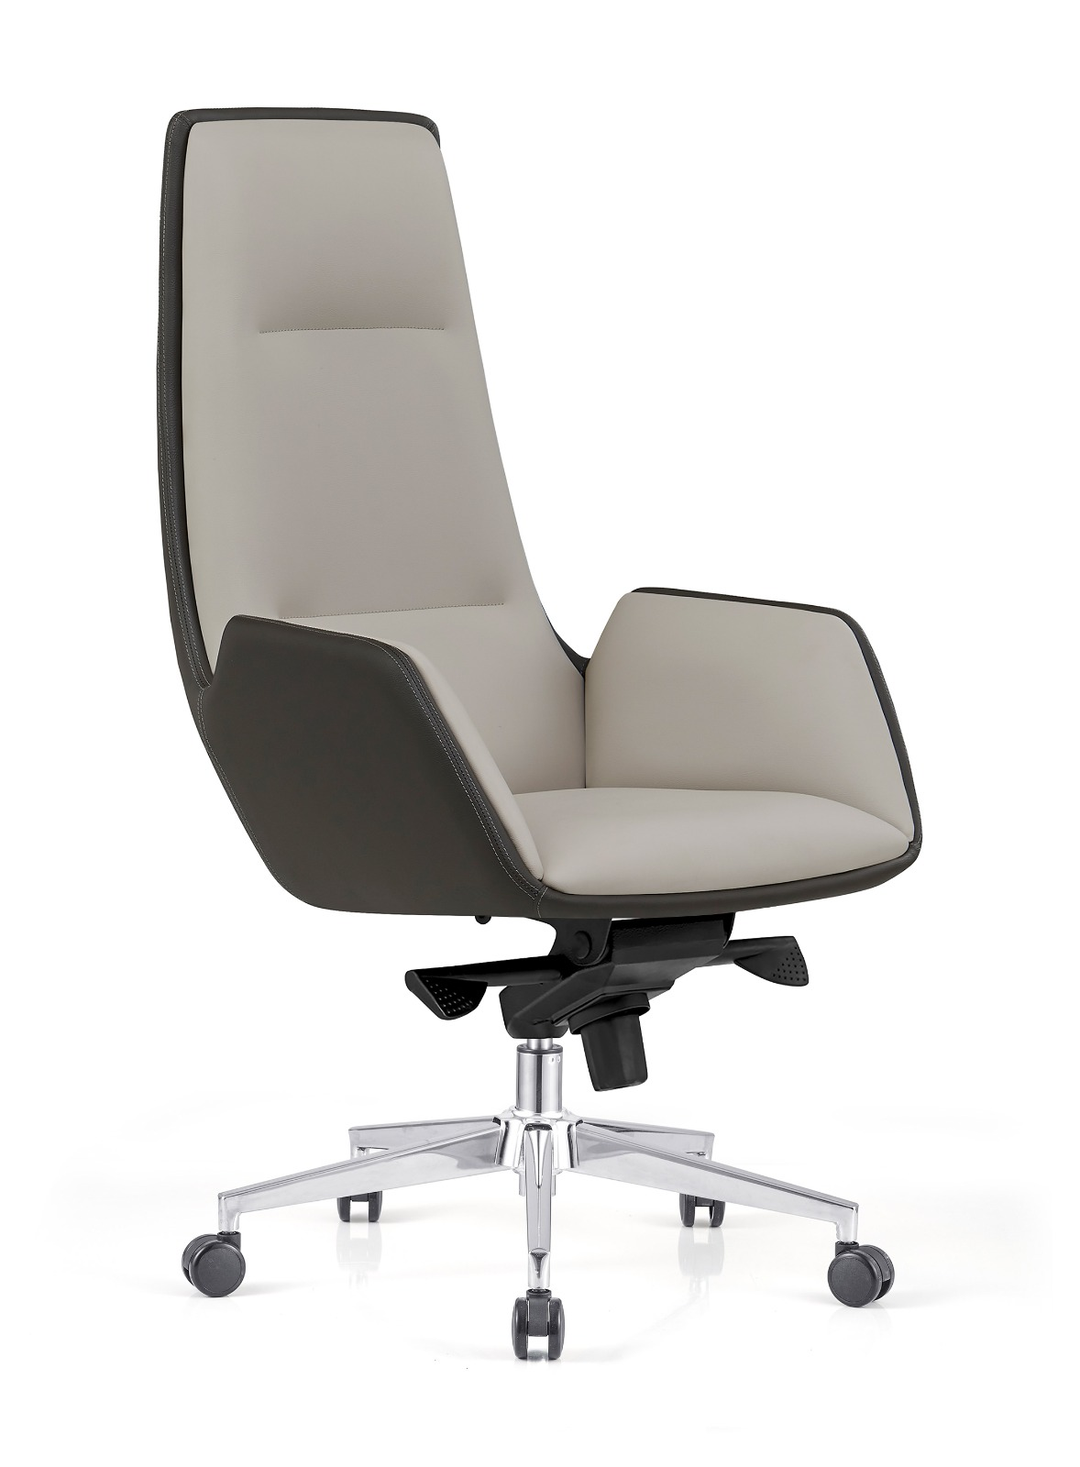 High Back Office Chairs by Classic Furniture Dubai UAE